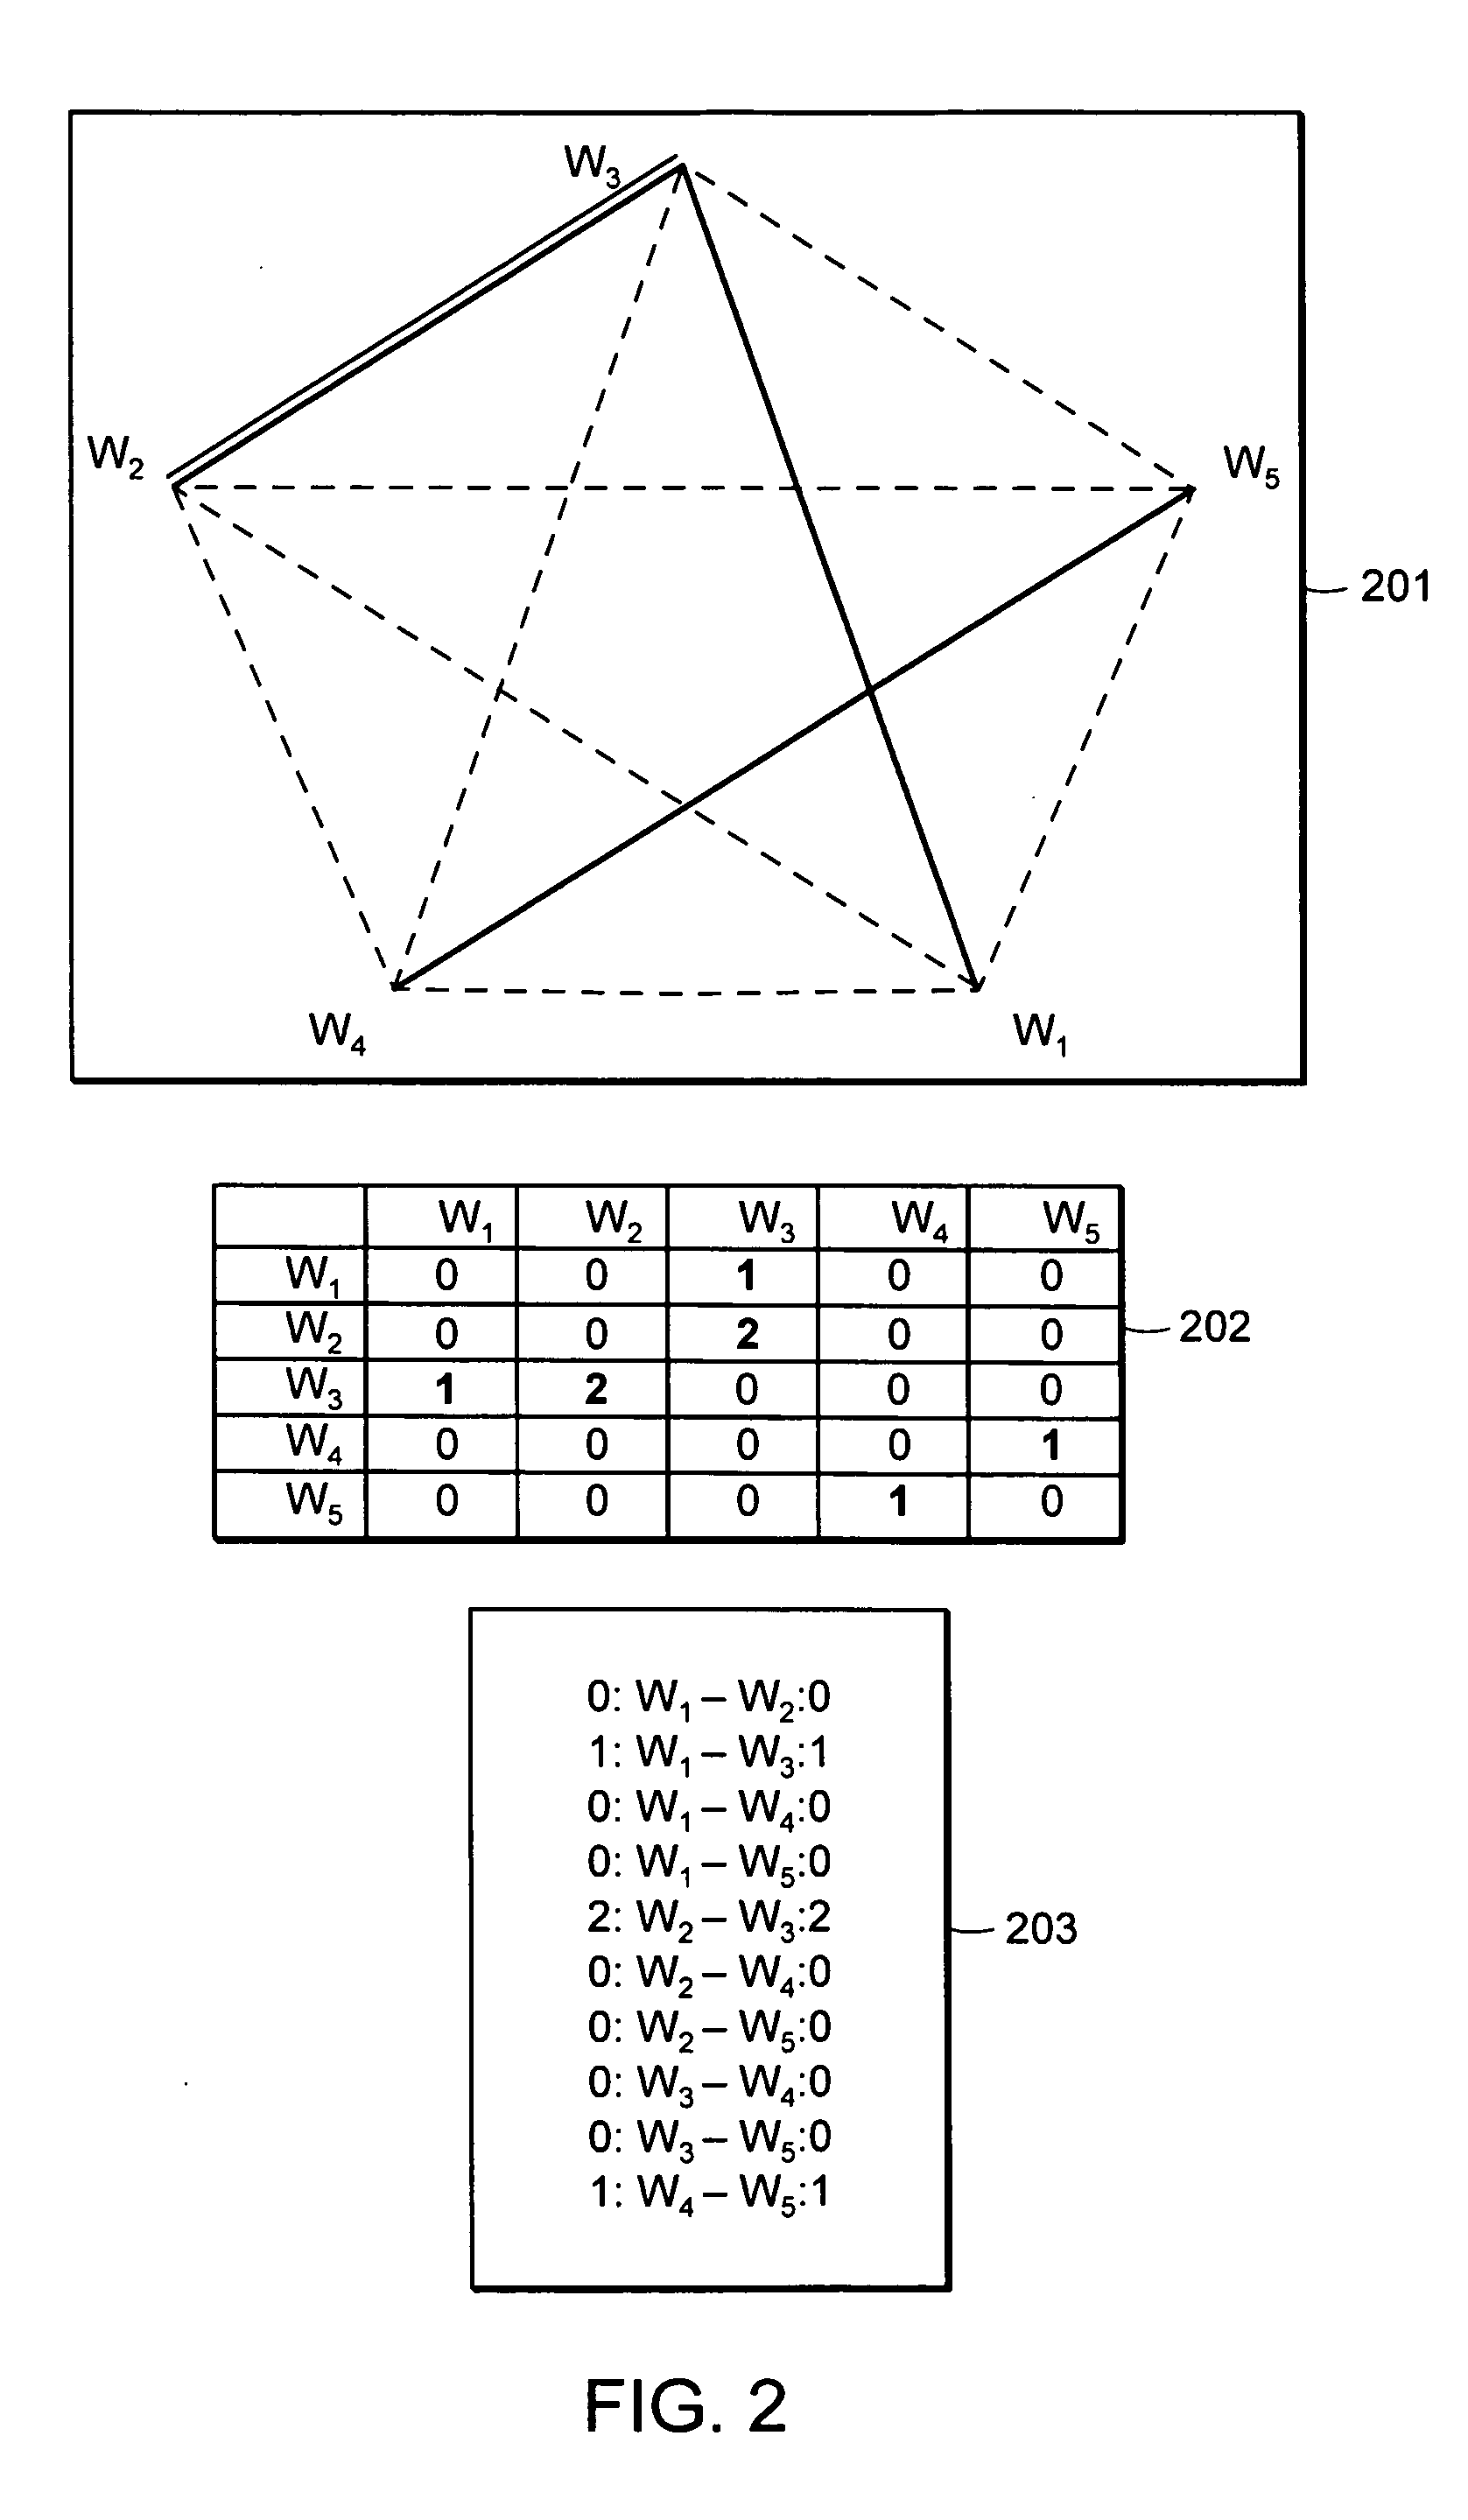 Method and apparatus for informational processing based on creation of term-proximity graphs and their embeddings into informational units